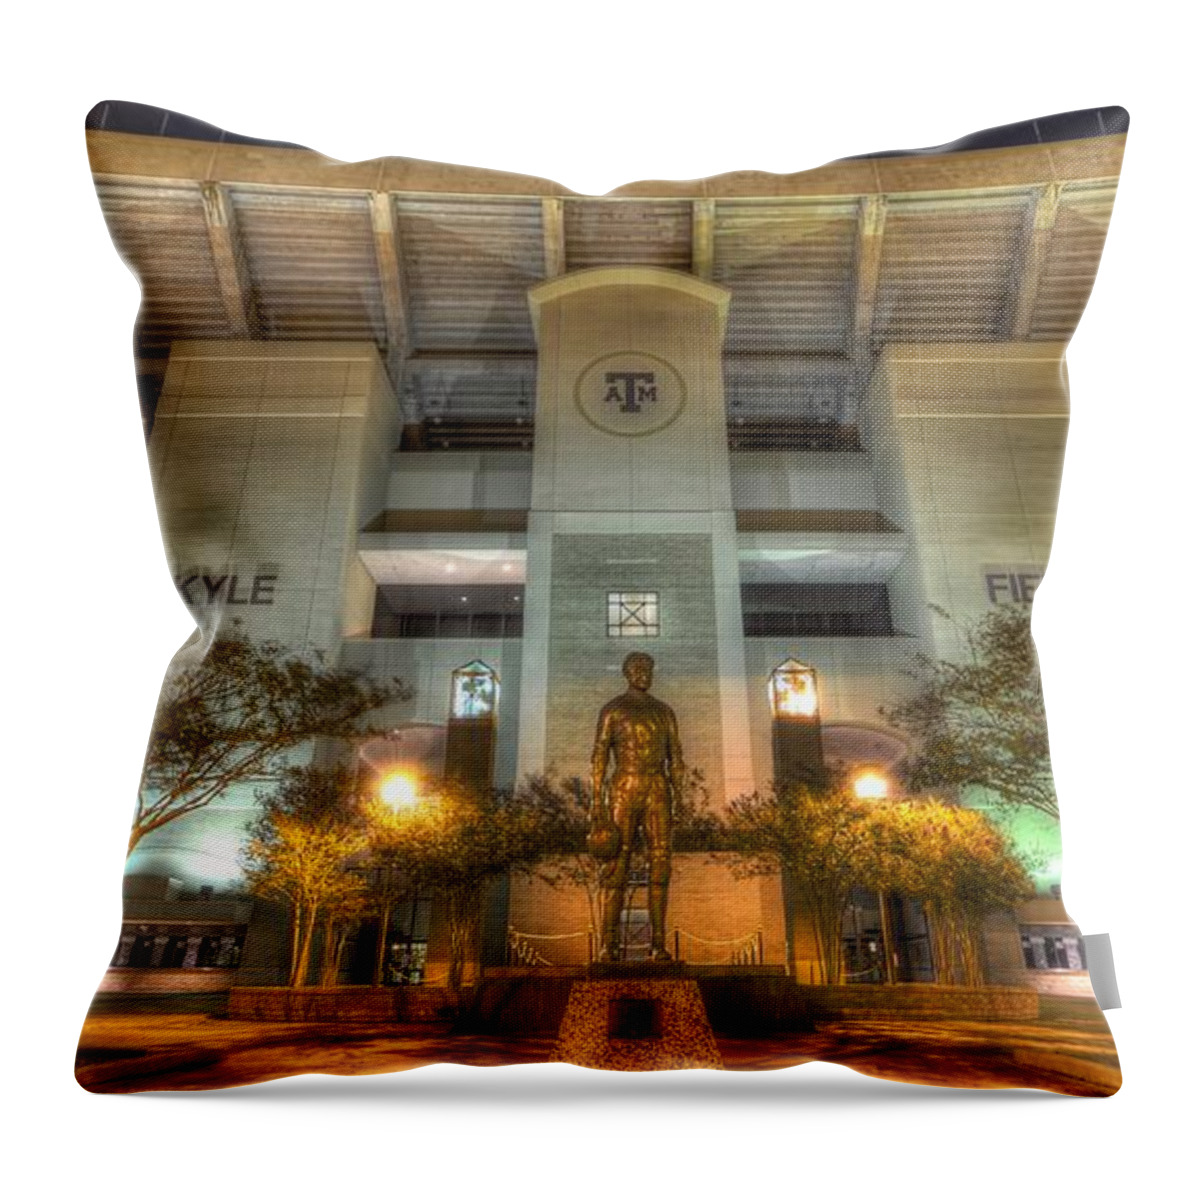 12th Man Throw Pillow featuring the photograph Kyle Field by David Morefield